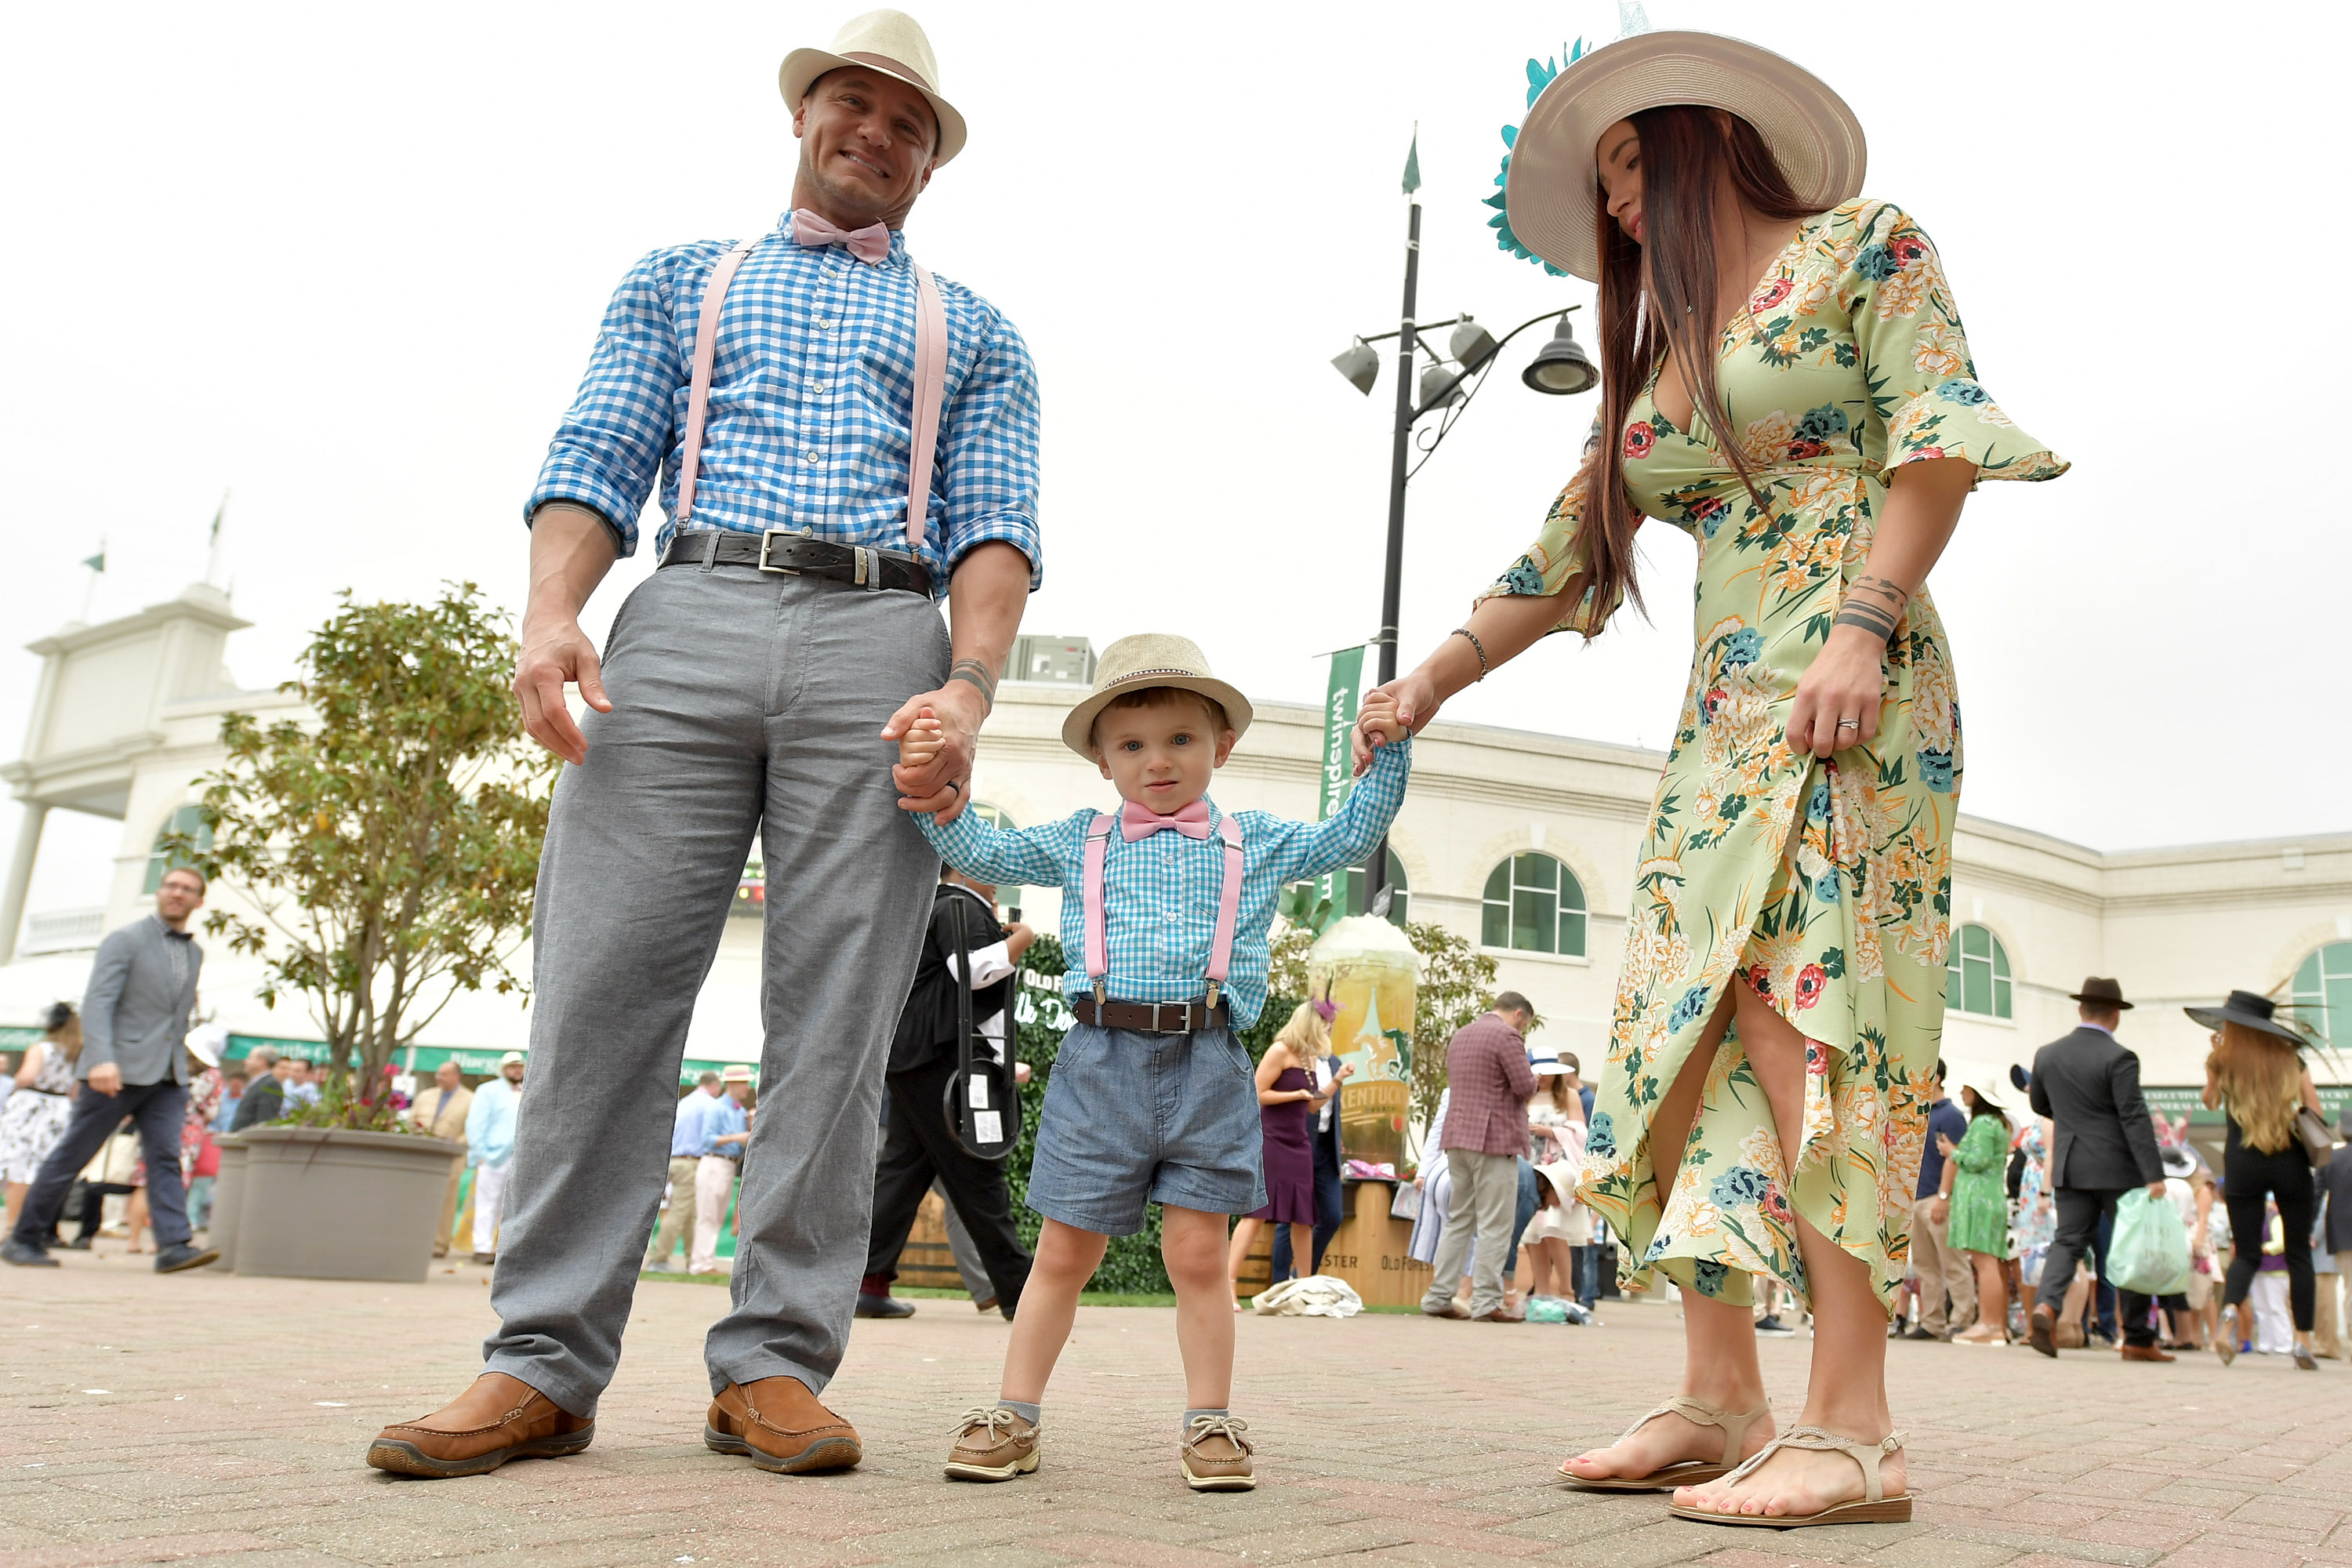 Guests attend the 145th Kentucky Derby at Churchill Downs